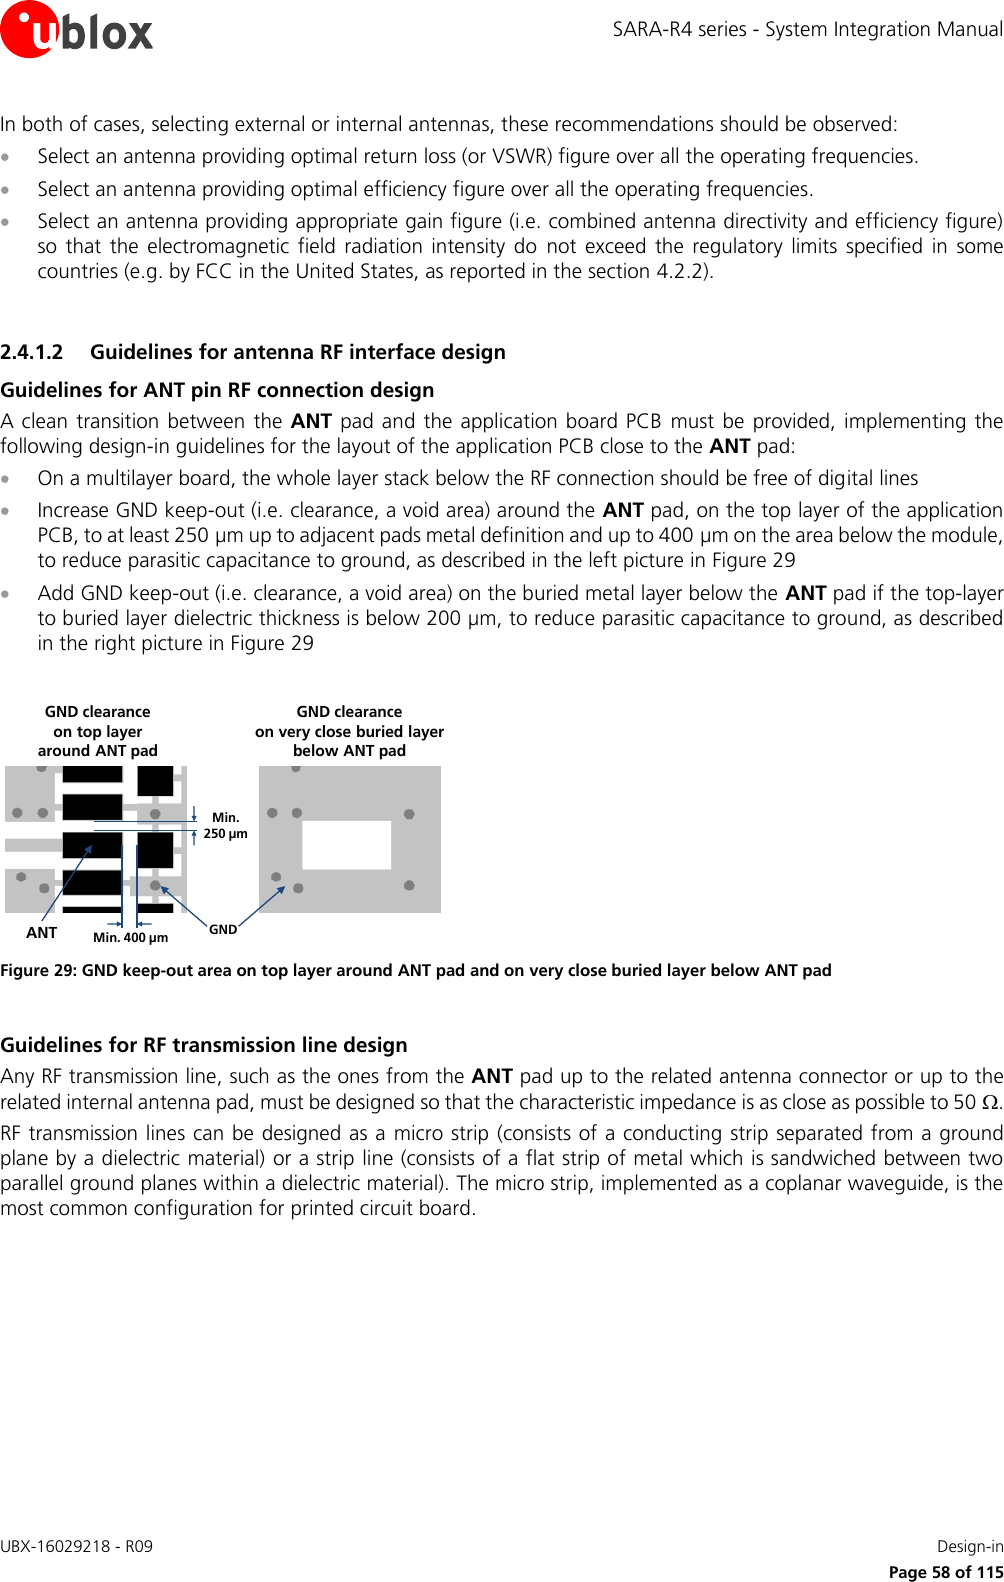 SARA-R4 series - System Integration Manual UBX-16029218 - R09    Design-in     Page 58 of 115 In both of cases, selecting external or internal antennas, these recommendations should be observed:  Select an antenna providing optimal return loss (or VSWR) figure over all the operating frequencies.  Select an antenna providing optimal efficiency figure over all the operating frequencies.  Select an antenna providing appropriate gain figure (i.e. combined antenna directivity and efficiency figure) so  that  the  electromagnetic  field  radiation intensity  do  not  exceed  the  regulatory  limits  specified  in  some countries (e.g. by FCC in the United States, as reported in the section 4.2.2).  2.4.1.2 Guidelines for antenna RF interface design Guidelines for ANT pin RF connection design A clean transition  between the ANT pad and the application board  PCB must  be  provided,  implementing the following design-in guidelines for the layout of the application PCB close to the ANT pad:  On a multilayer board, the whole layer stack below the RF connection should be free of digital lines  Increase GND keep-out (i.e. clearance, a void area) around the ANT pad, on the top layer of the application PCB, to at least 250 µm up to adjacent pads metal definition and up to 400 µm on the area below the module, to reduce parasitic capacitance to ground, as described in the left picture in Figure 29  Add GND keep-out (i.e. clearance, a void area) on the buried metal layer below the ANT pad if the top-layer to buried layer dielectric thickness is below 200 µm, to reduce parasitic capacitance to ground, as described in the right picture in Figure 29  Min. 250 µmMin. 400 µm GNDANTGND clearance on very close buried layerbelow ANT padGND clearance on top layer around ANT pad Figure 29: GND keep-out area on top layer around ANT pad and on very close buried layer below ANT pad  Guidelines for RF transmission line design Any RF transmission line, such as the ones from the ANT pad up to the related antenna connector or up to the related internal antenna pad, must be designed so that the characteristic impedance is as close as possible to 50 . RF transmission lines can be designed as a micro strip  (consists of a conducting strip separated from a ground plane by a dielectric material) or a strip line (consists of a flat strip of metal which is sandwiched between two parallel ground planes within a dielectric material). The micro strip, implemented as a coplanar waveguide, is the most common configuration for printed circuit board.  